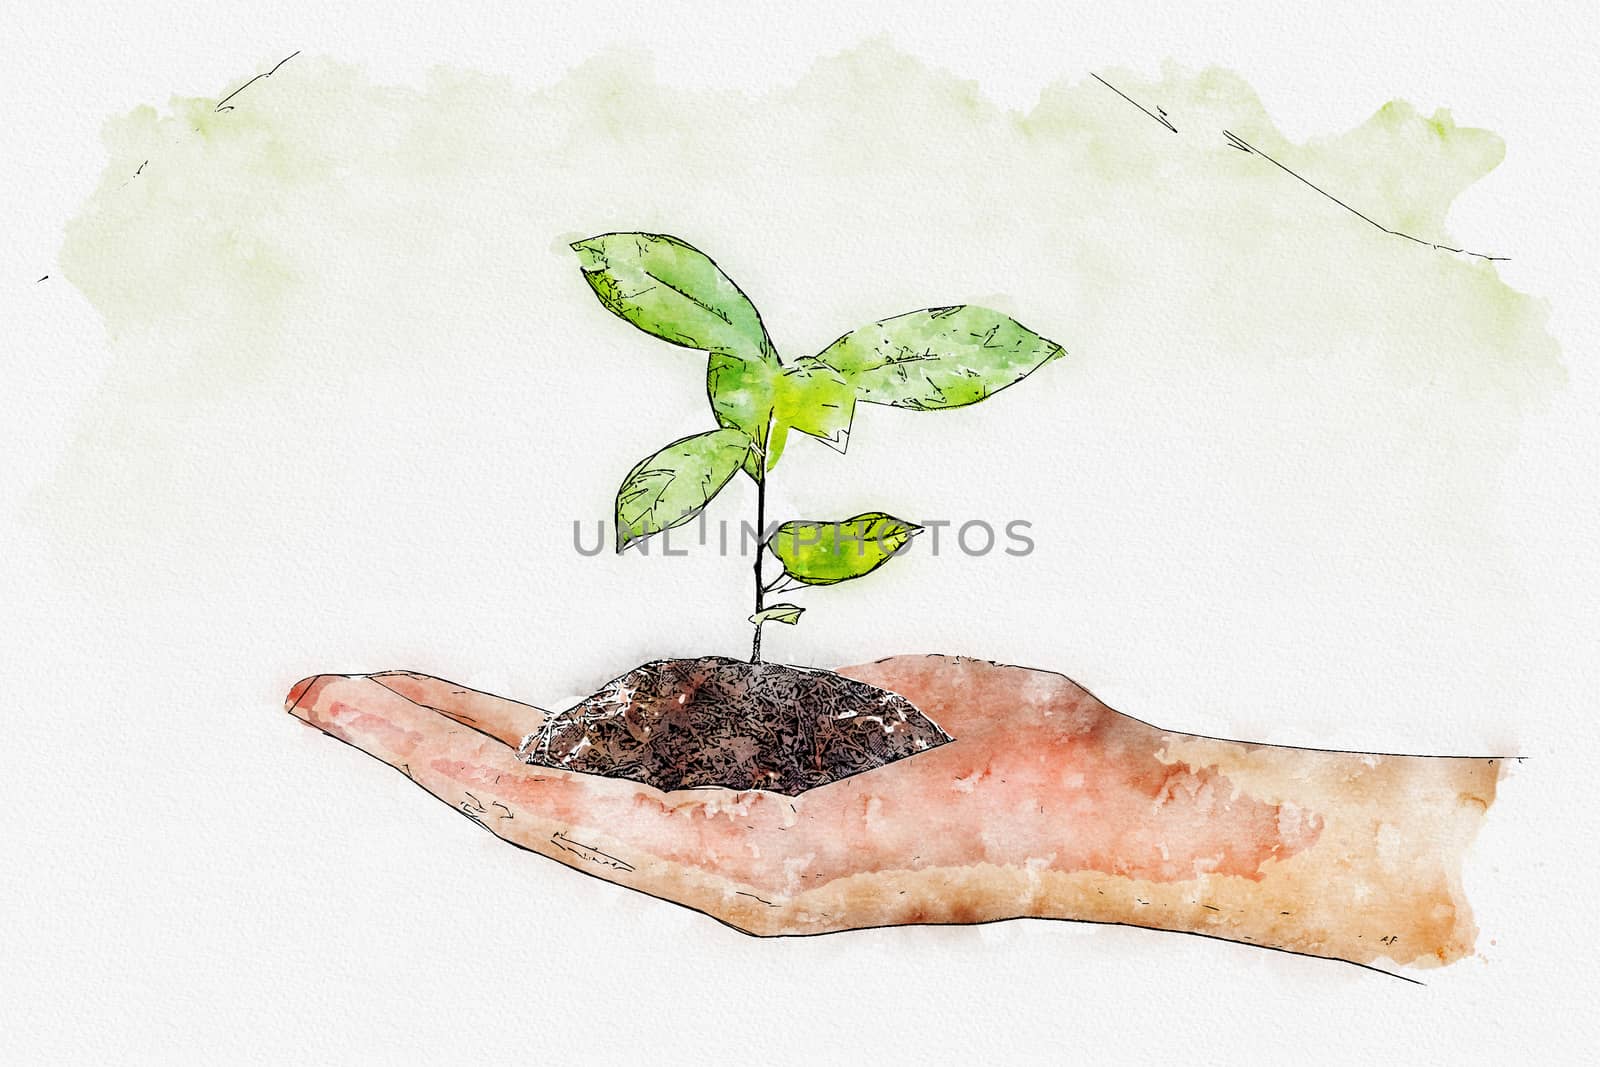 Watercolor of plant in the hand on green background.